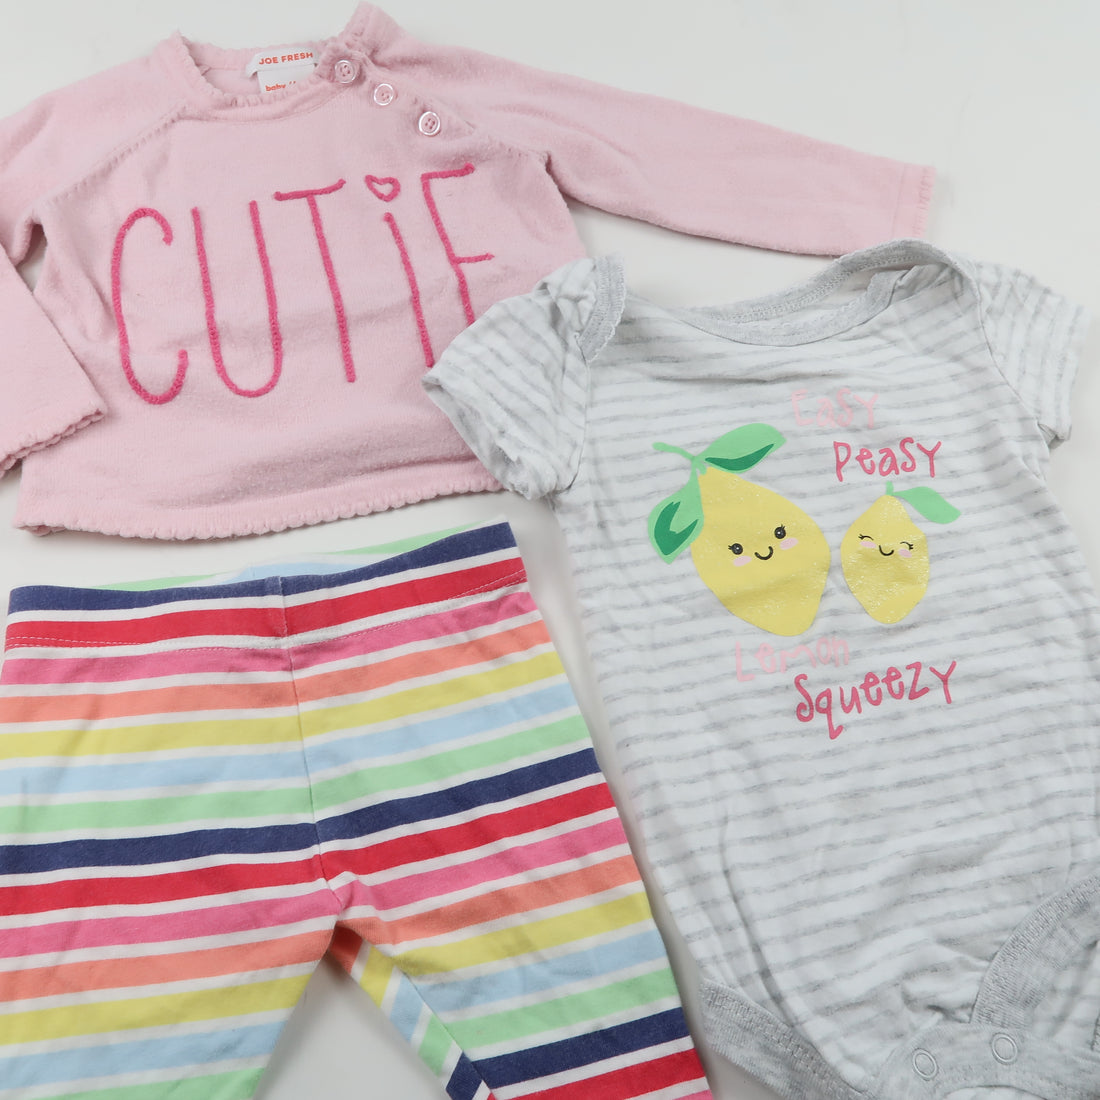 Mixed Brands - Outfit Set (3-6M)